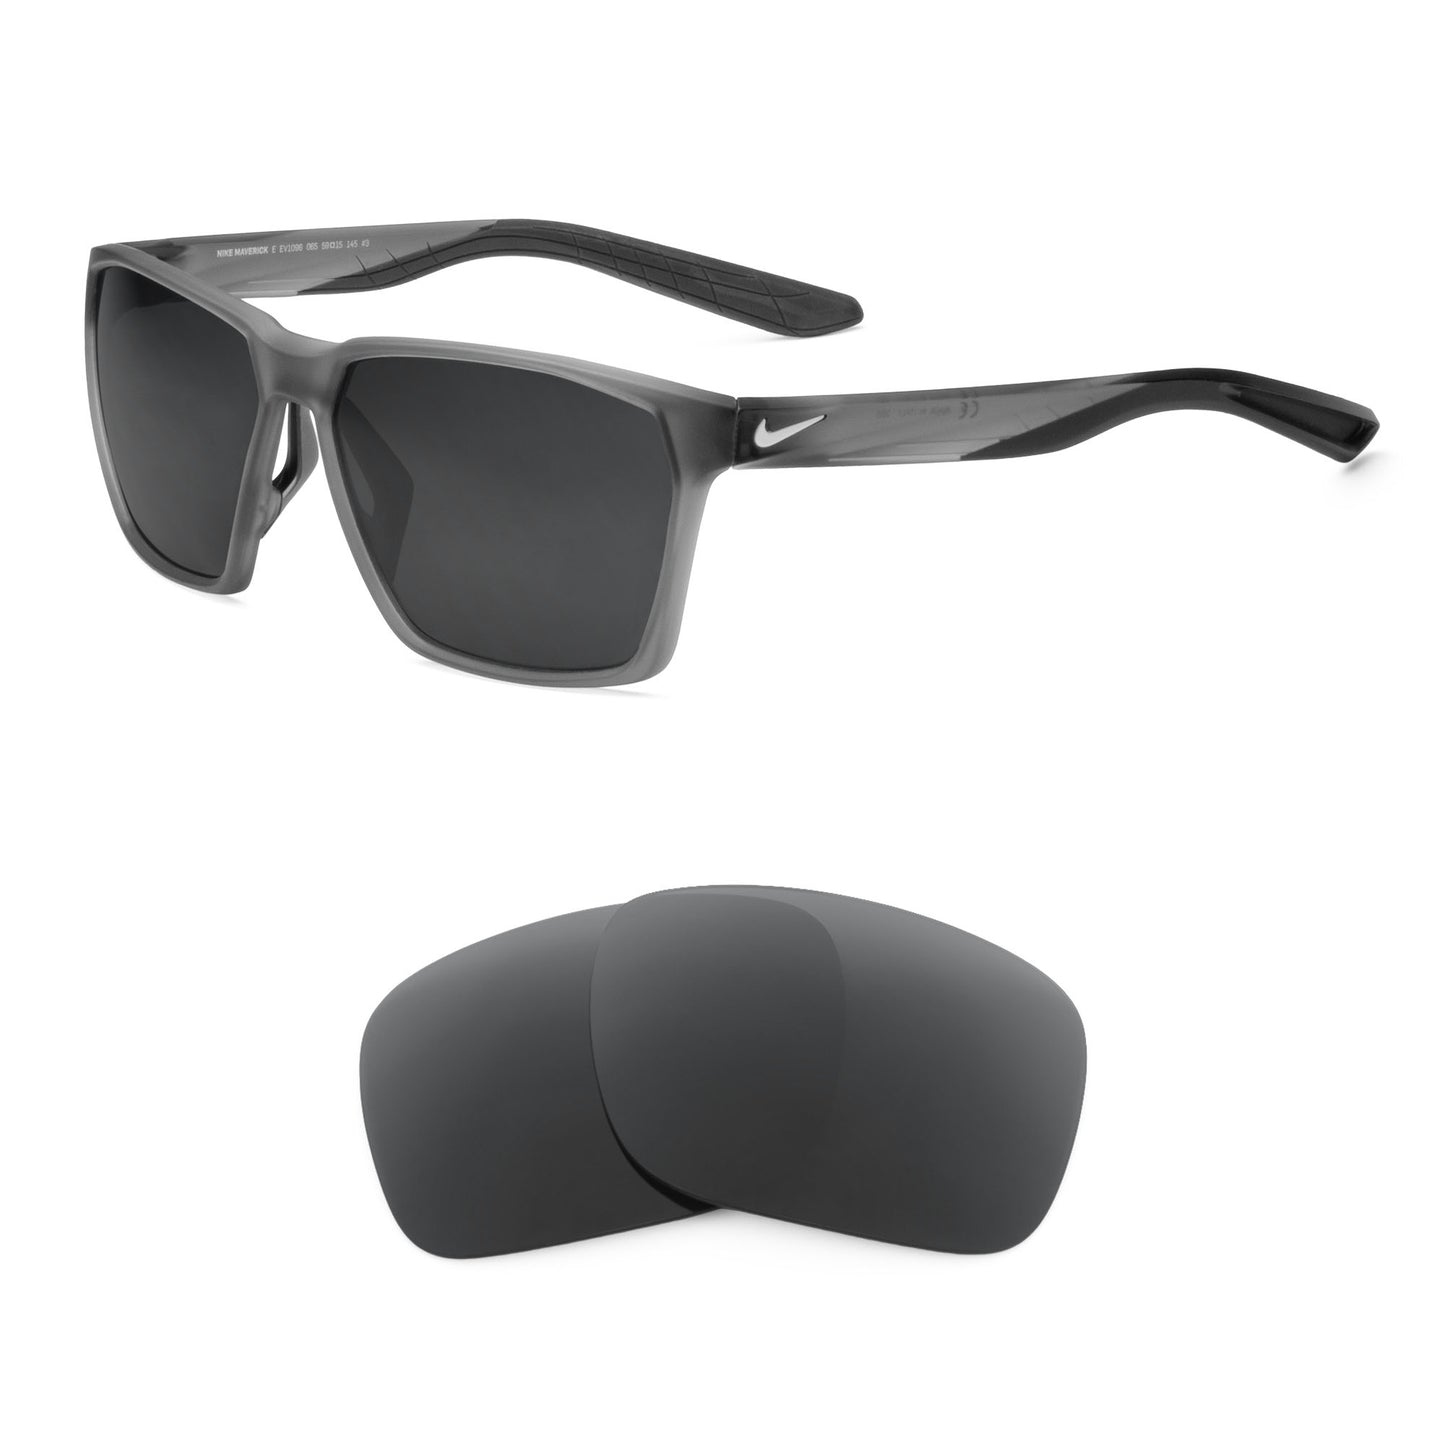 Nike Maverick sunglasses with replacement lenses